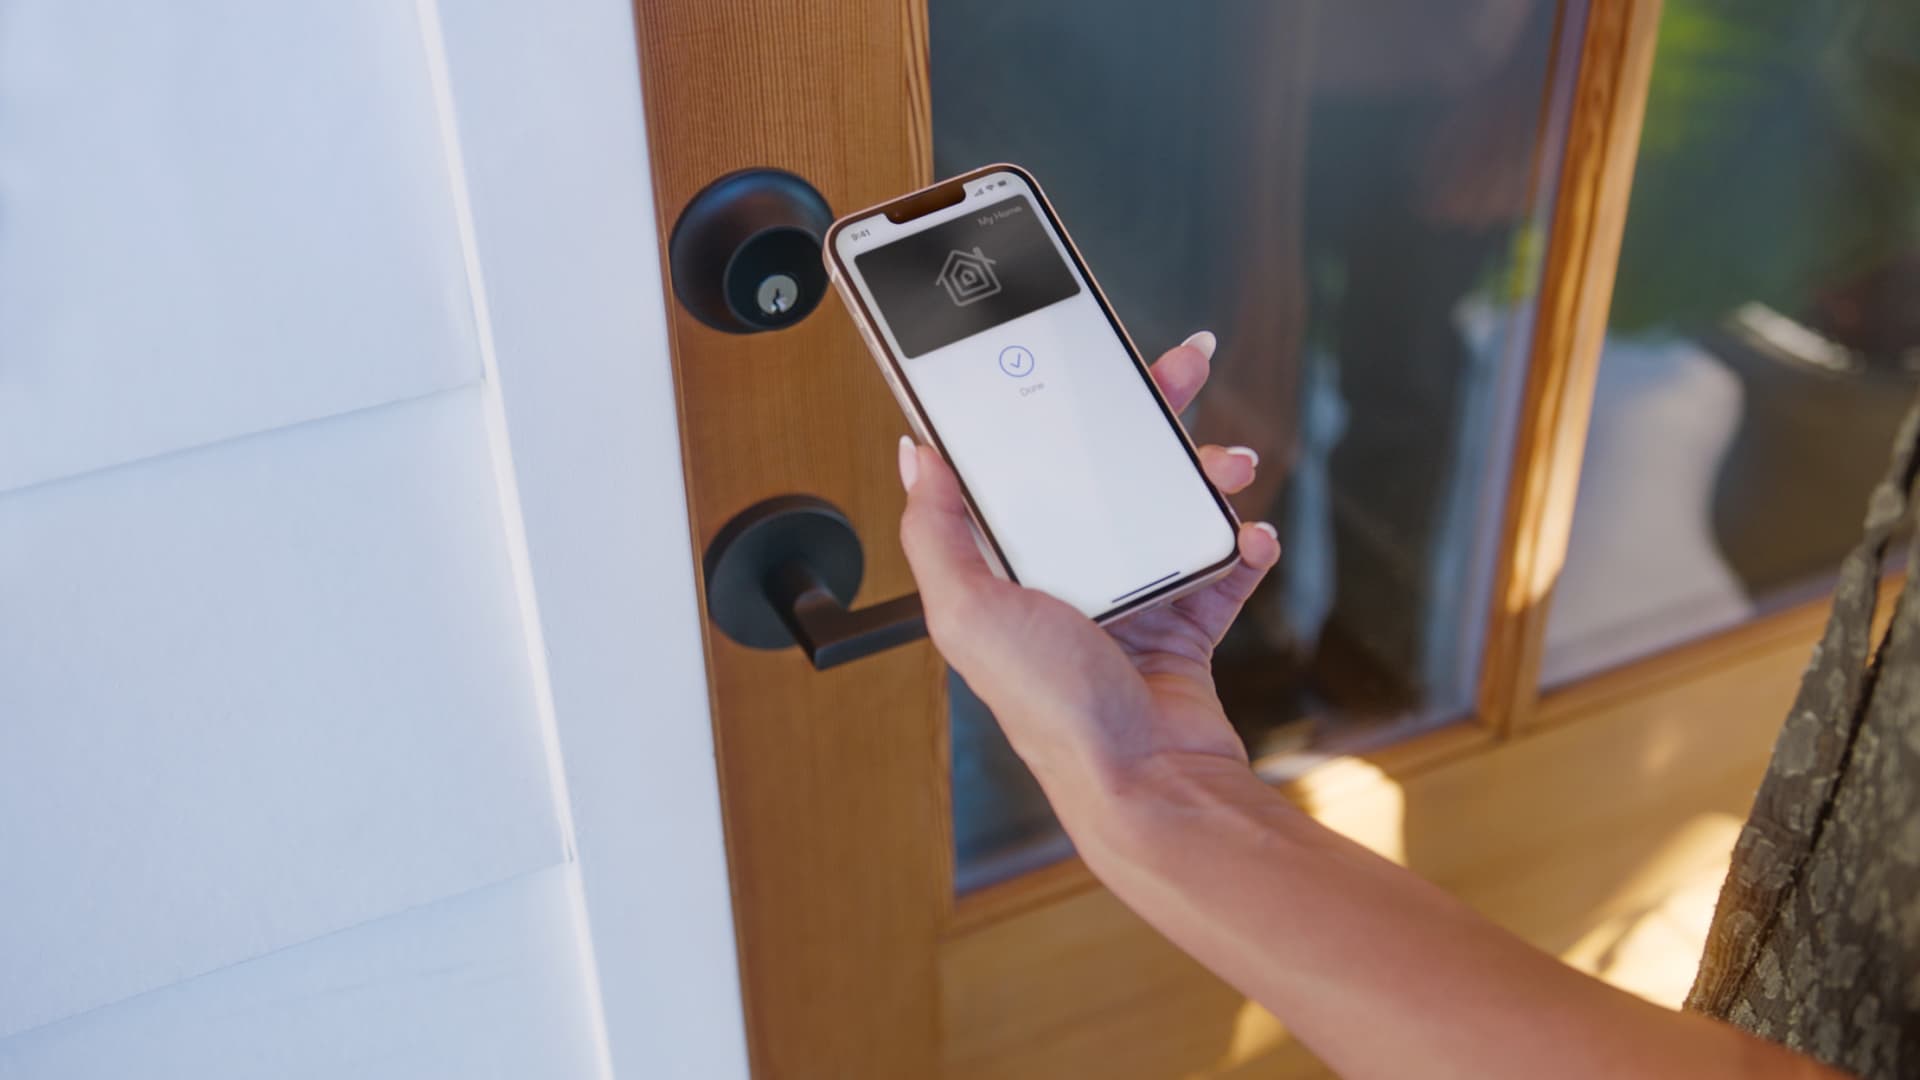 Apple stores begin selling exterior door lock that can be unlocked by tapping an iPhone or Apple Watch 